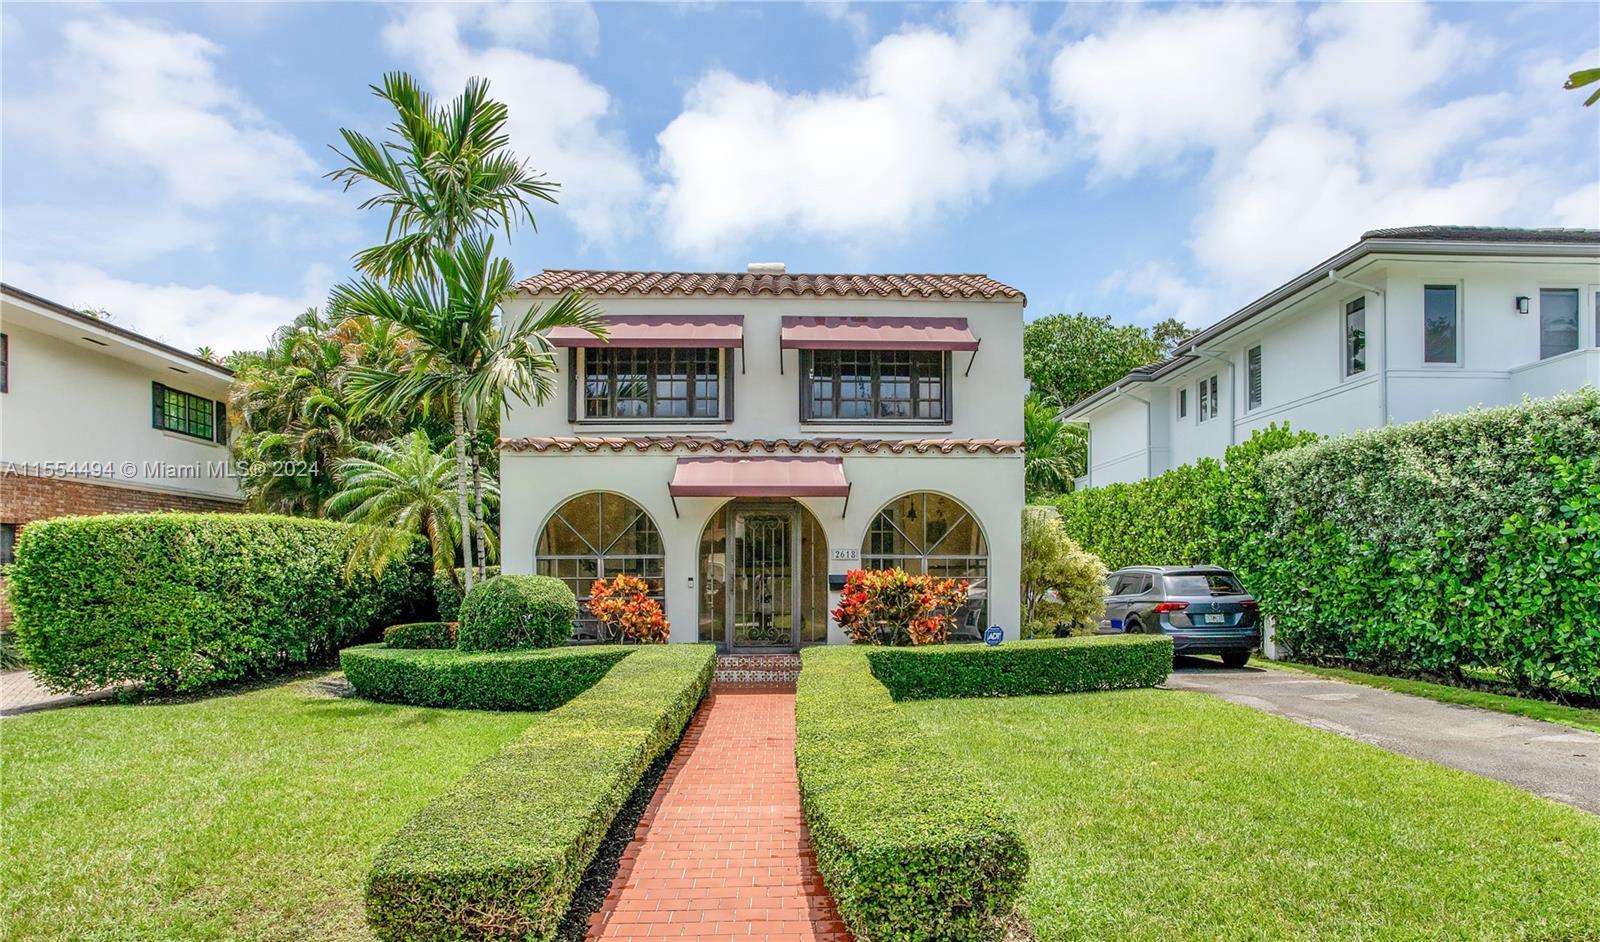 Photo of 2618 Alhambra Cir in Coral Gables, FL